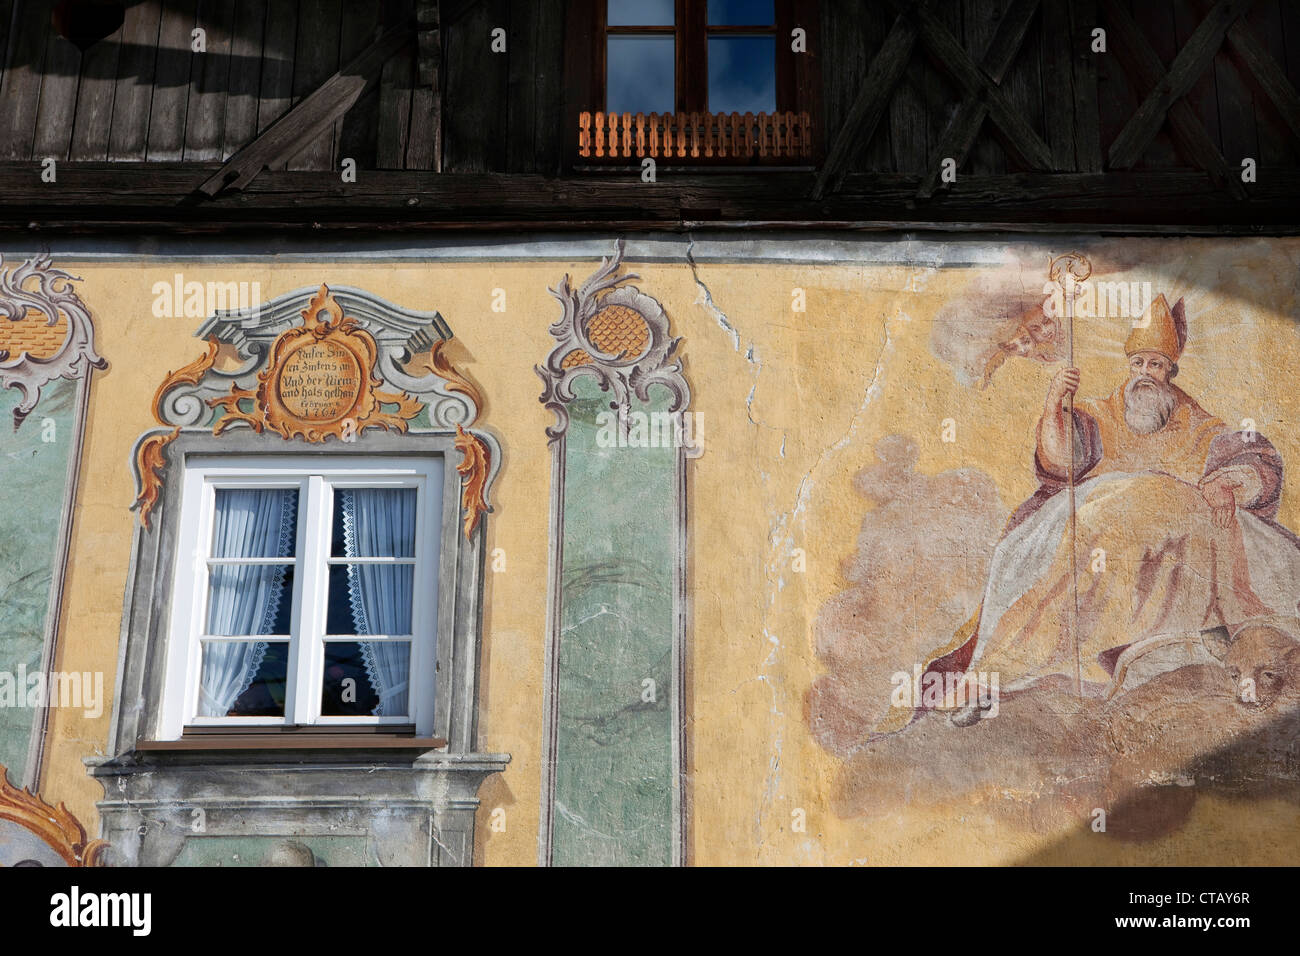 Traditionally painted exterior wall with depiction of a holy person, Mittenwald, Bavaria, Germany Stock Photo